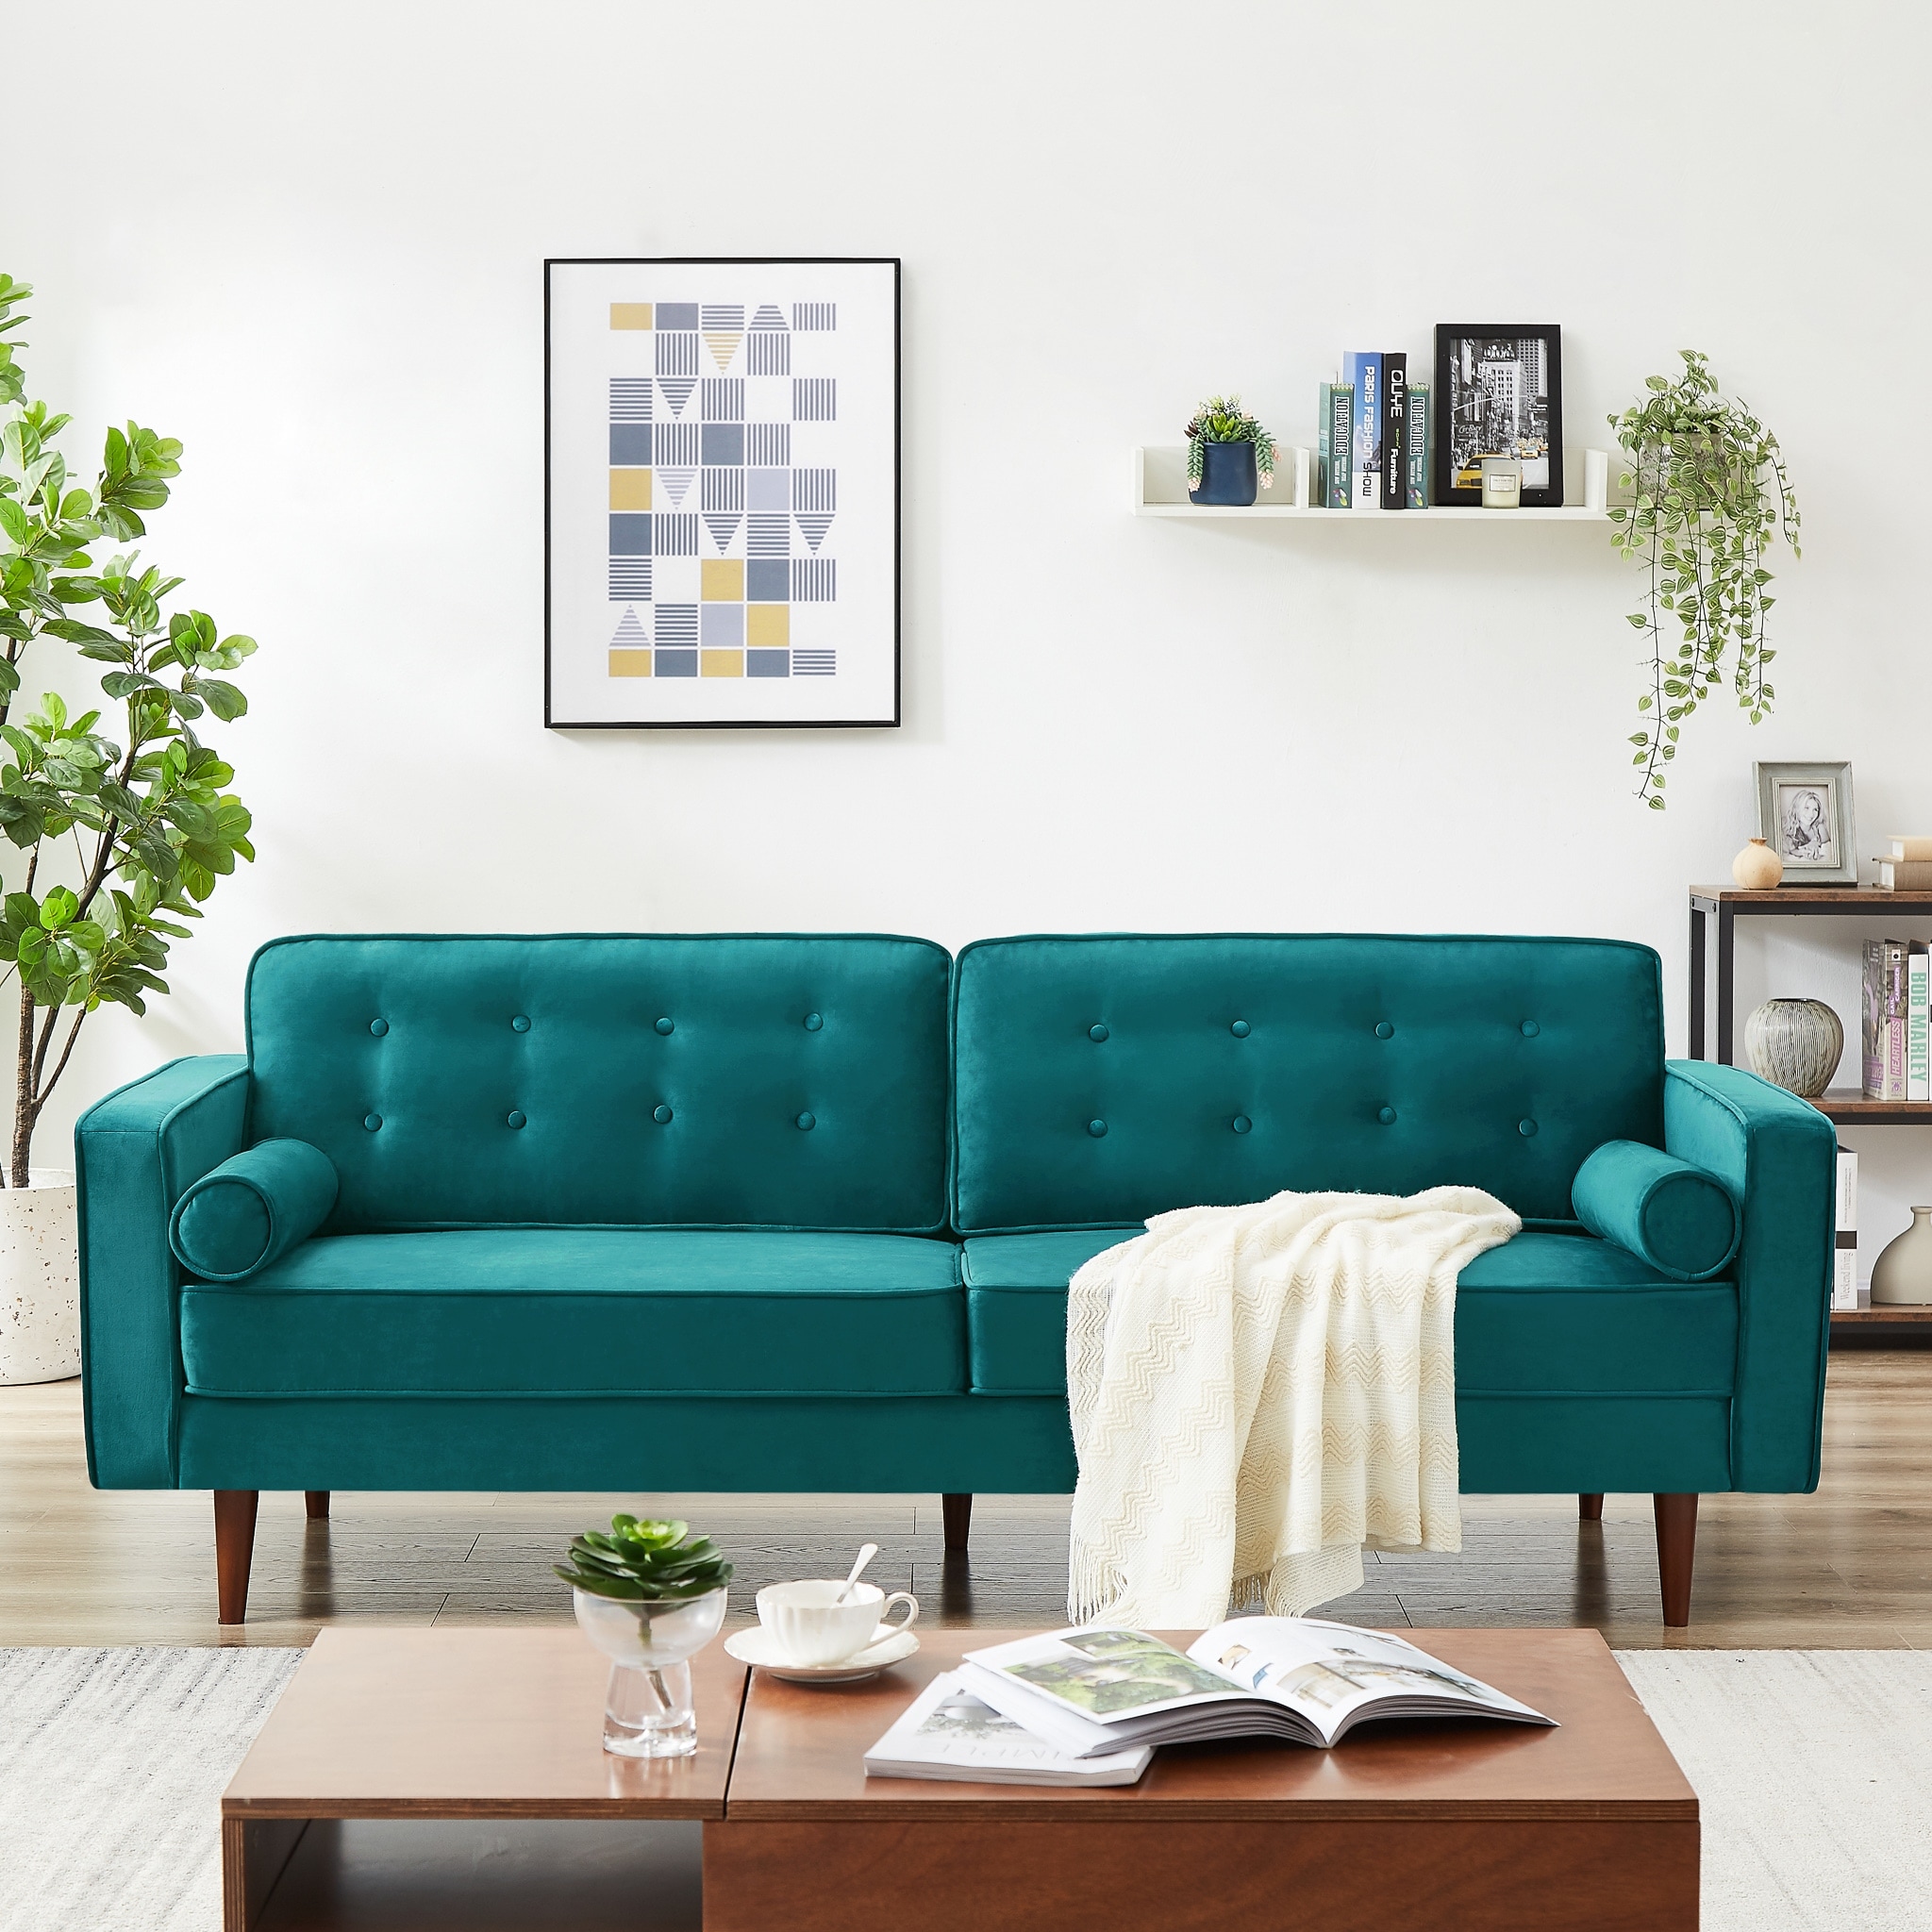 https://ak1.ostkcdn.com/images/products/is/images/direct/666bb2971cba42a0d9590fc3e39415d74f289293/Kerry-Mid-Century-Modern-Comfortable-Furniture-Style-Tufted-Velvet-Couch.jpg